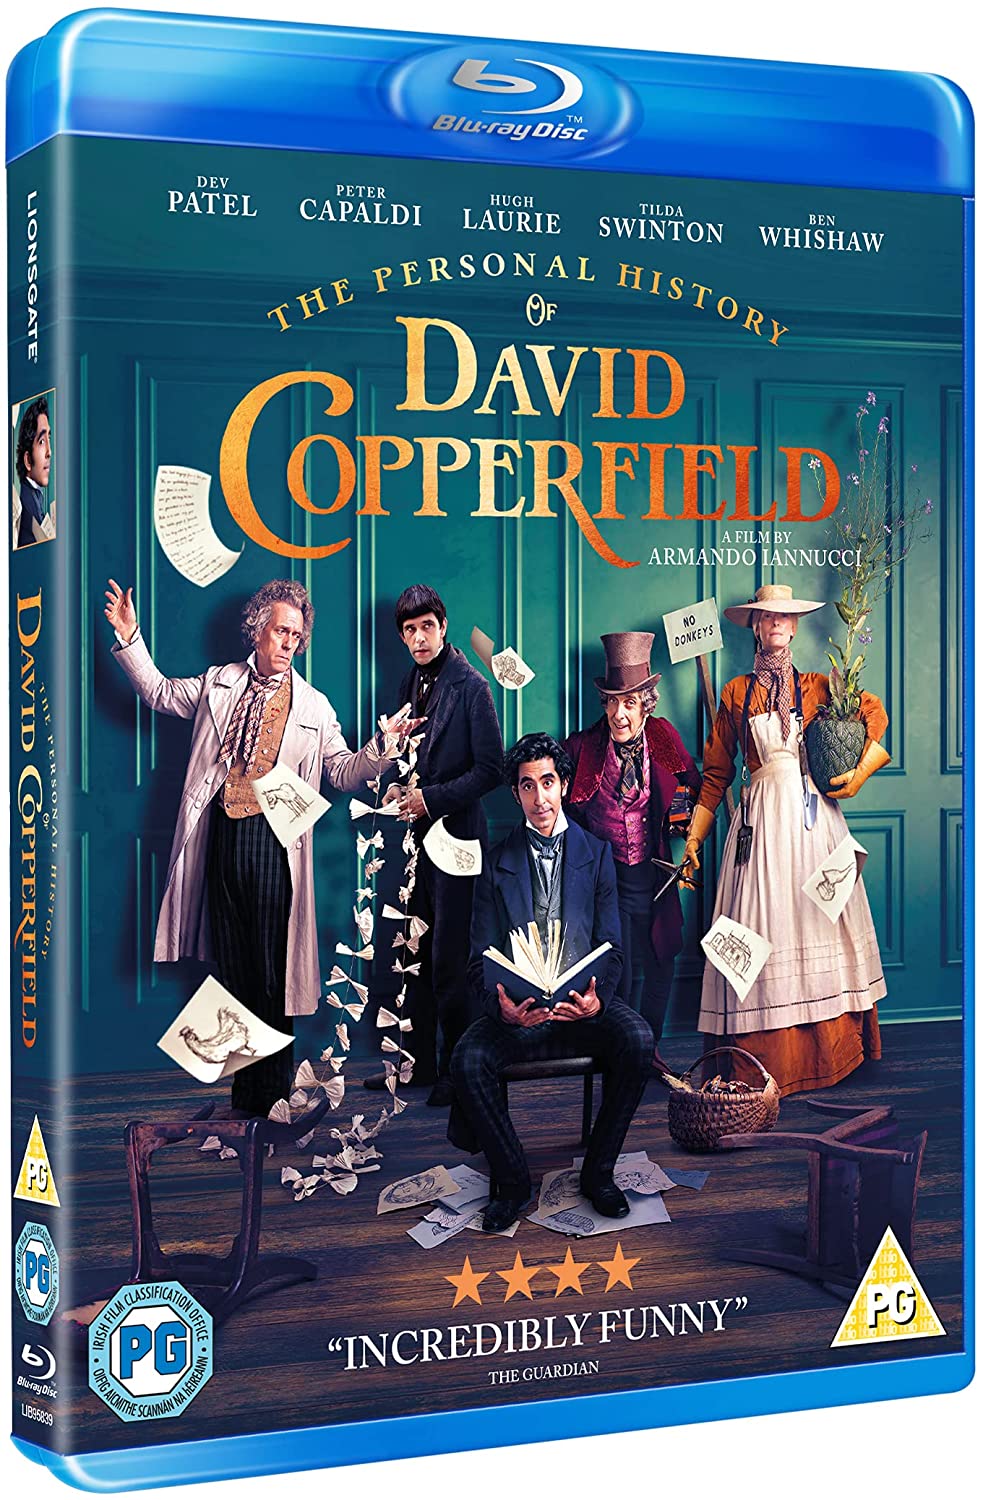 The Personal History of David Copperfield - Comedy [Blu-ray]